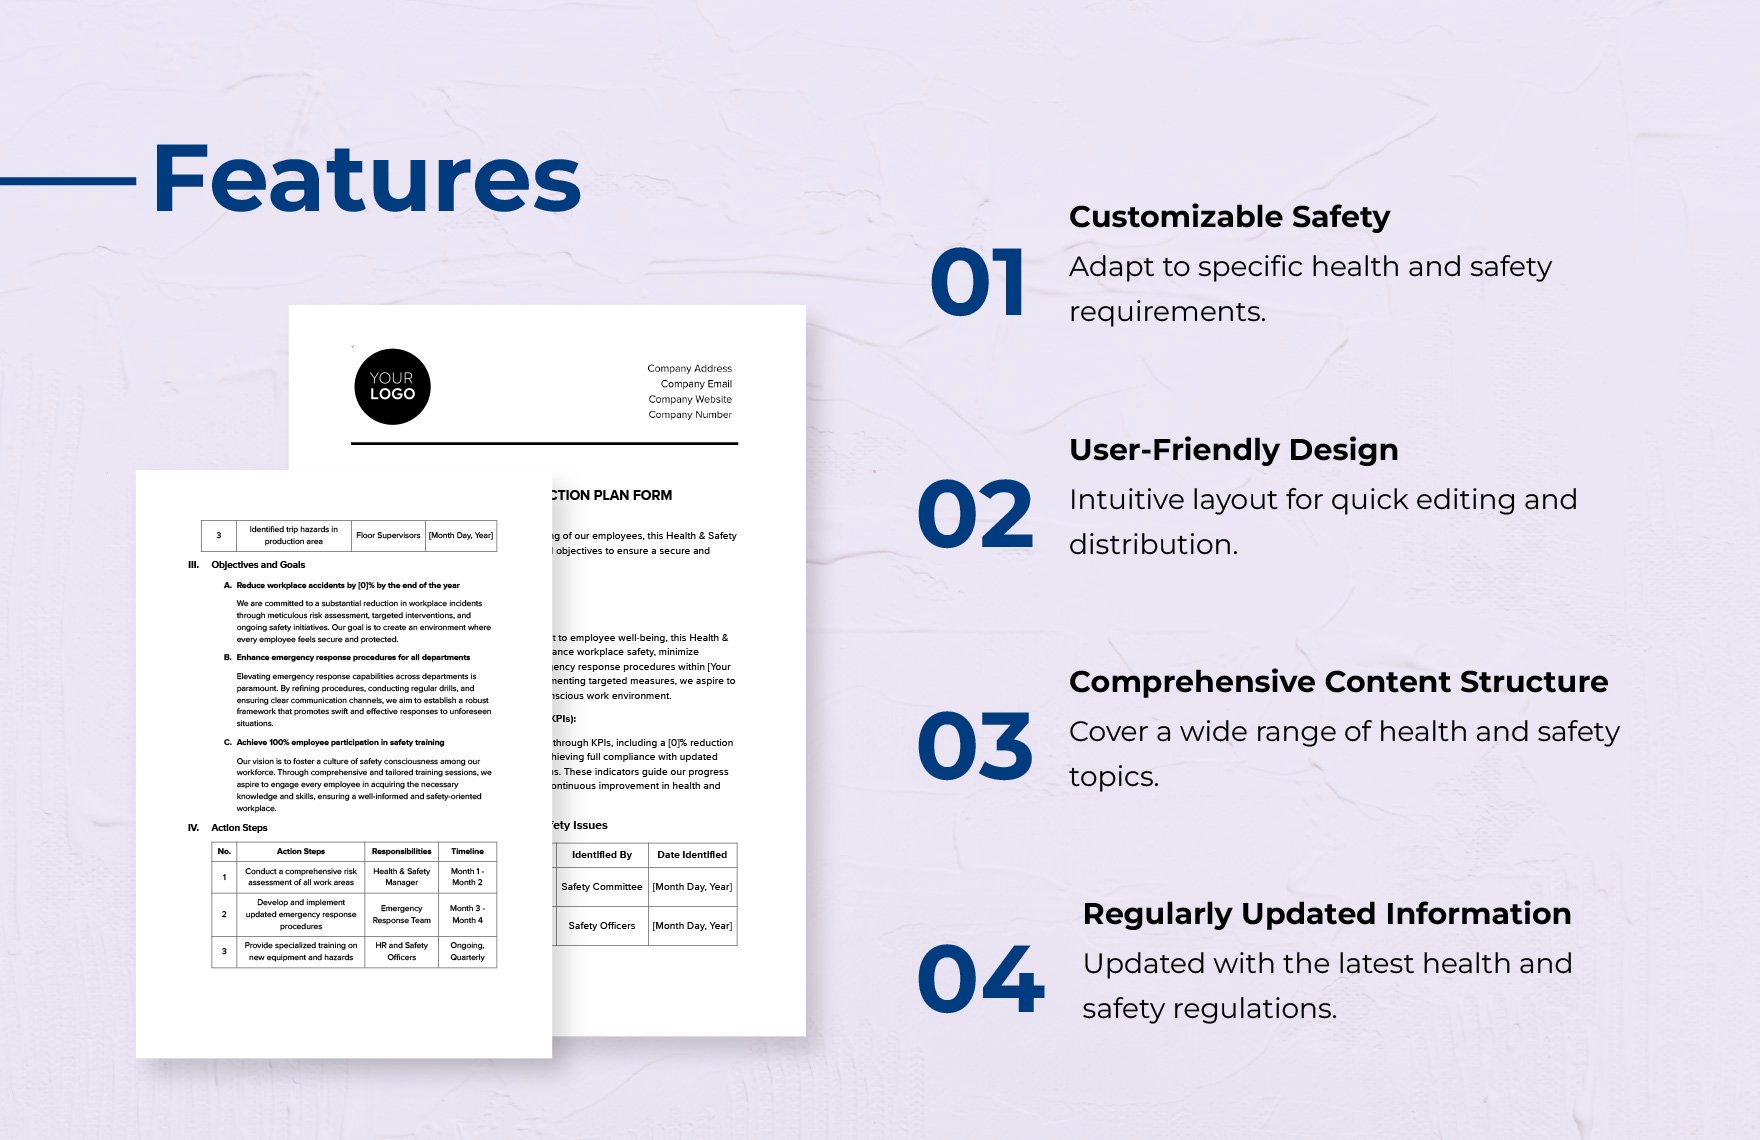 Health & Safety Action Plan Form Template